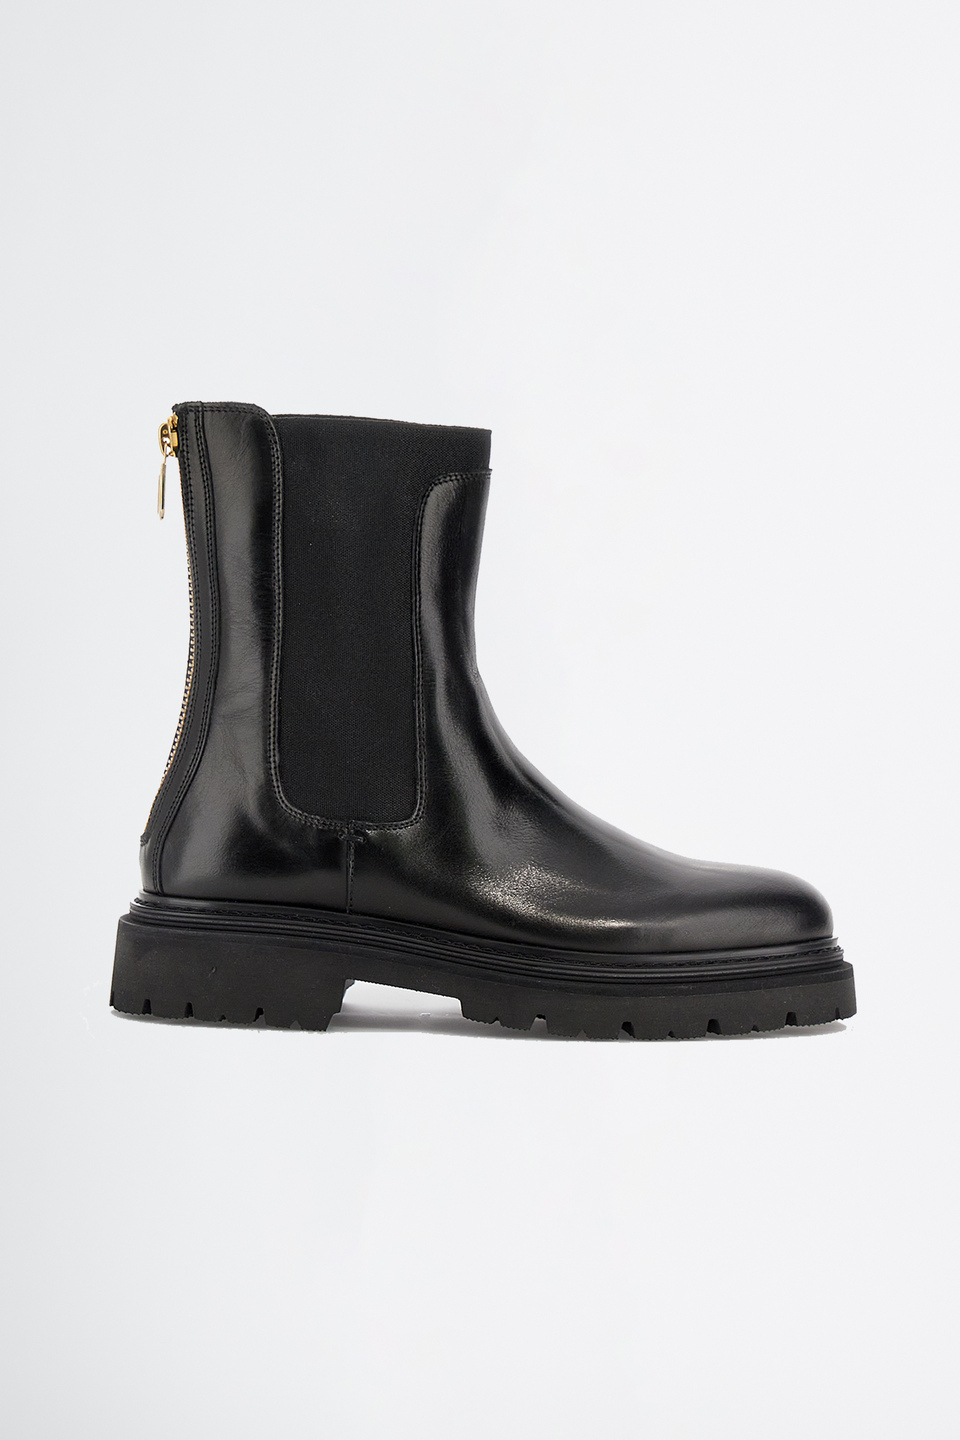 High city boot in leather | La Martina - Official Online Shop